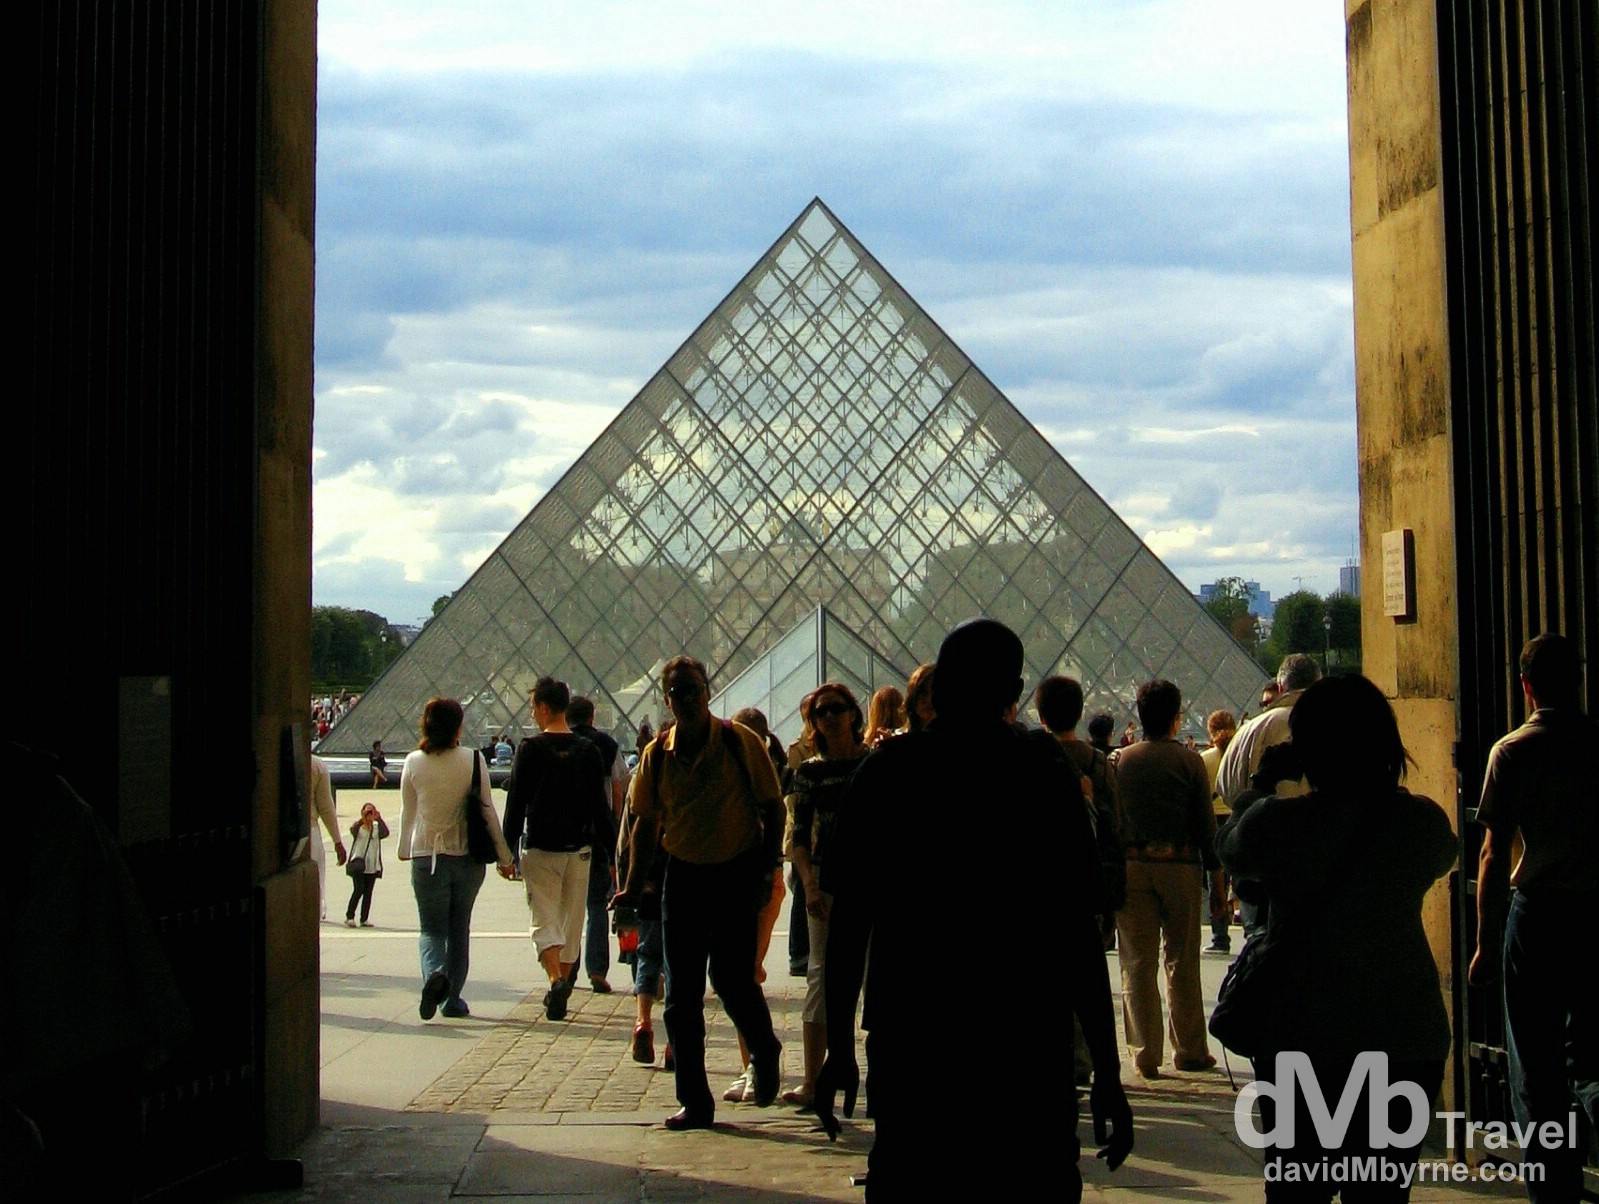 The Louvre Pyramid in the centre of the Napoleon Courtyard as seen through an opening in the Palais du Louvre (Louvre Palace), Paris, France. August 18th 2007